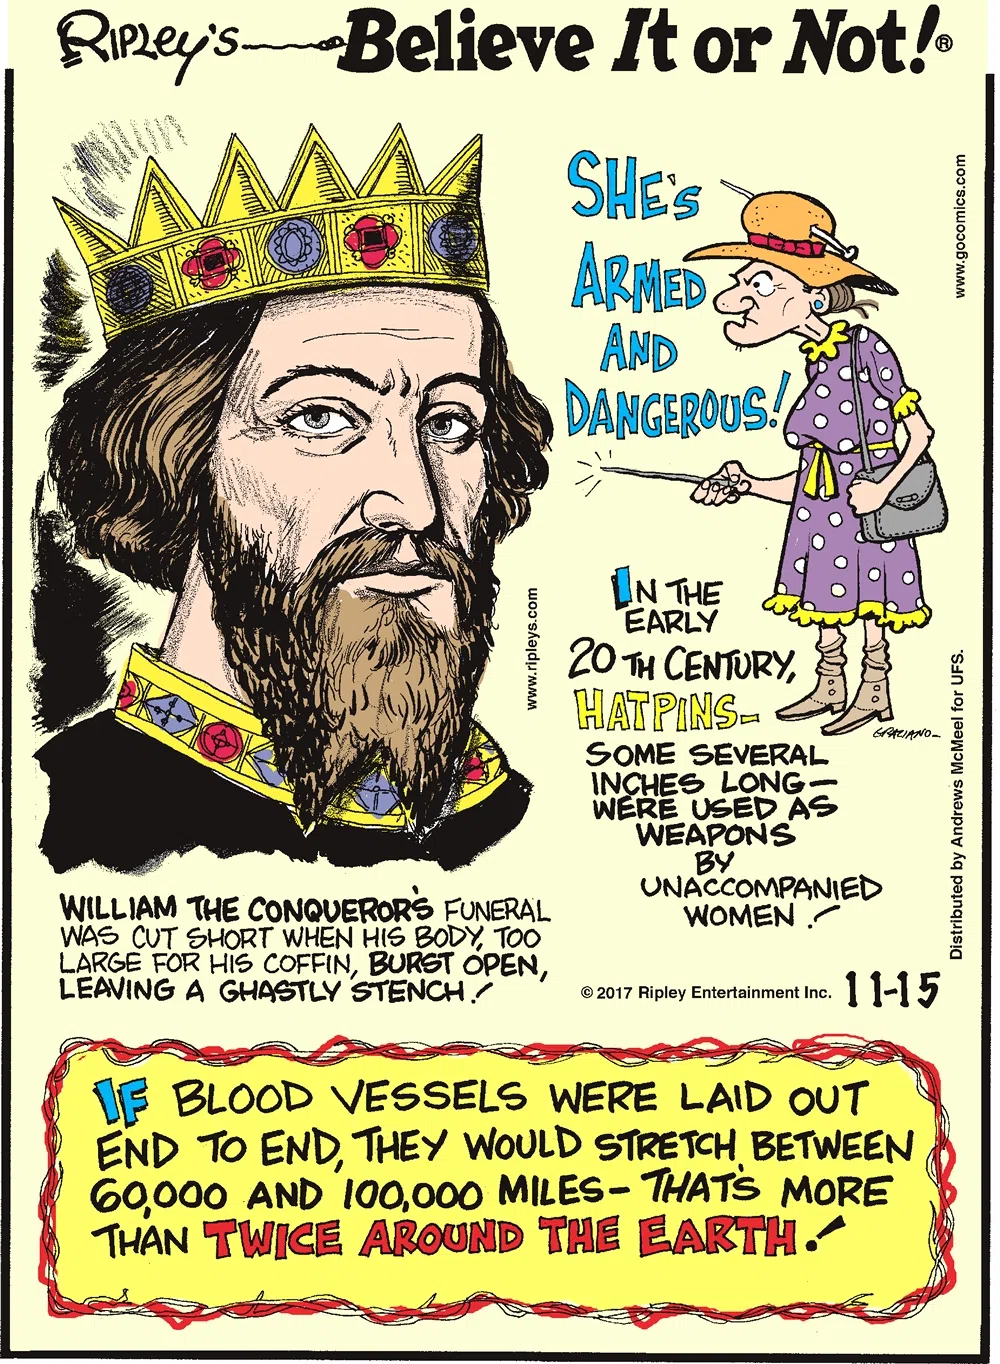 William the Conqueror's funeral was cut short when his body, too large for his coffin, burst open, leaving a ghastly stench!-------------------- In the early 20th Century, hatpins - some several inches long - were used as weapons by unaccompanied women!-------------------- If blood vessels were laid out end to end, they would stretch between 60,000 and 100,000 miles - that's more than twice around the Earth!